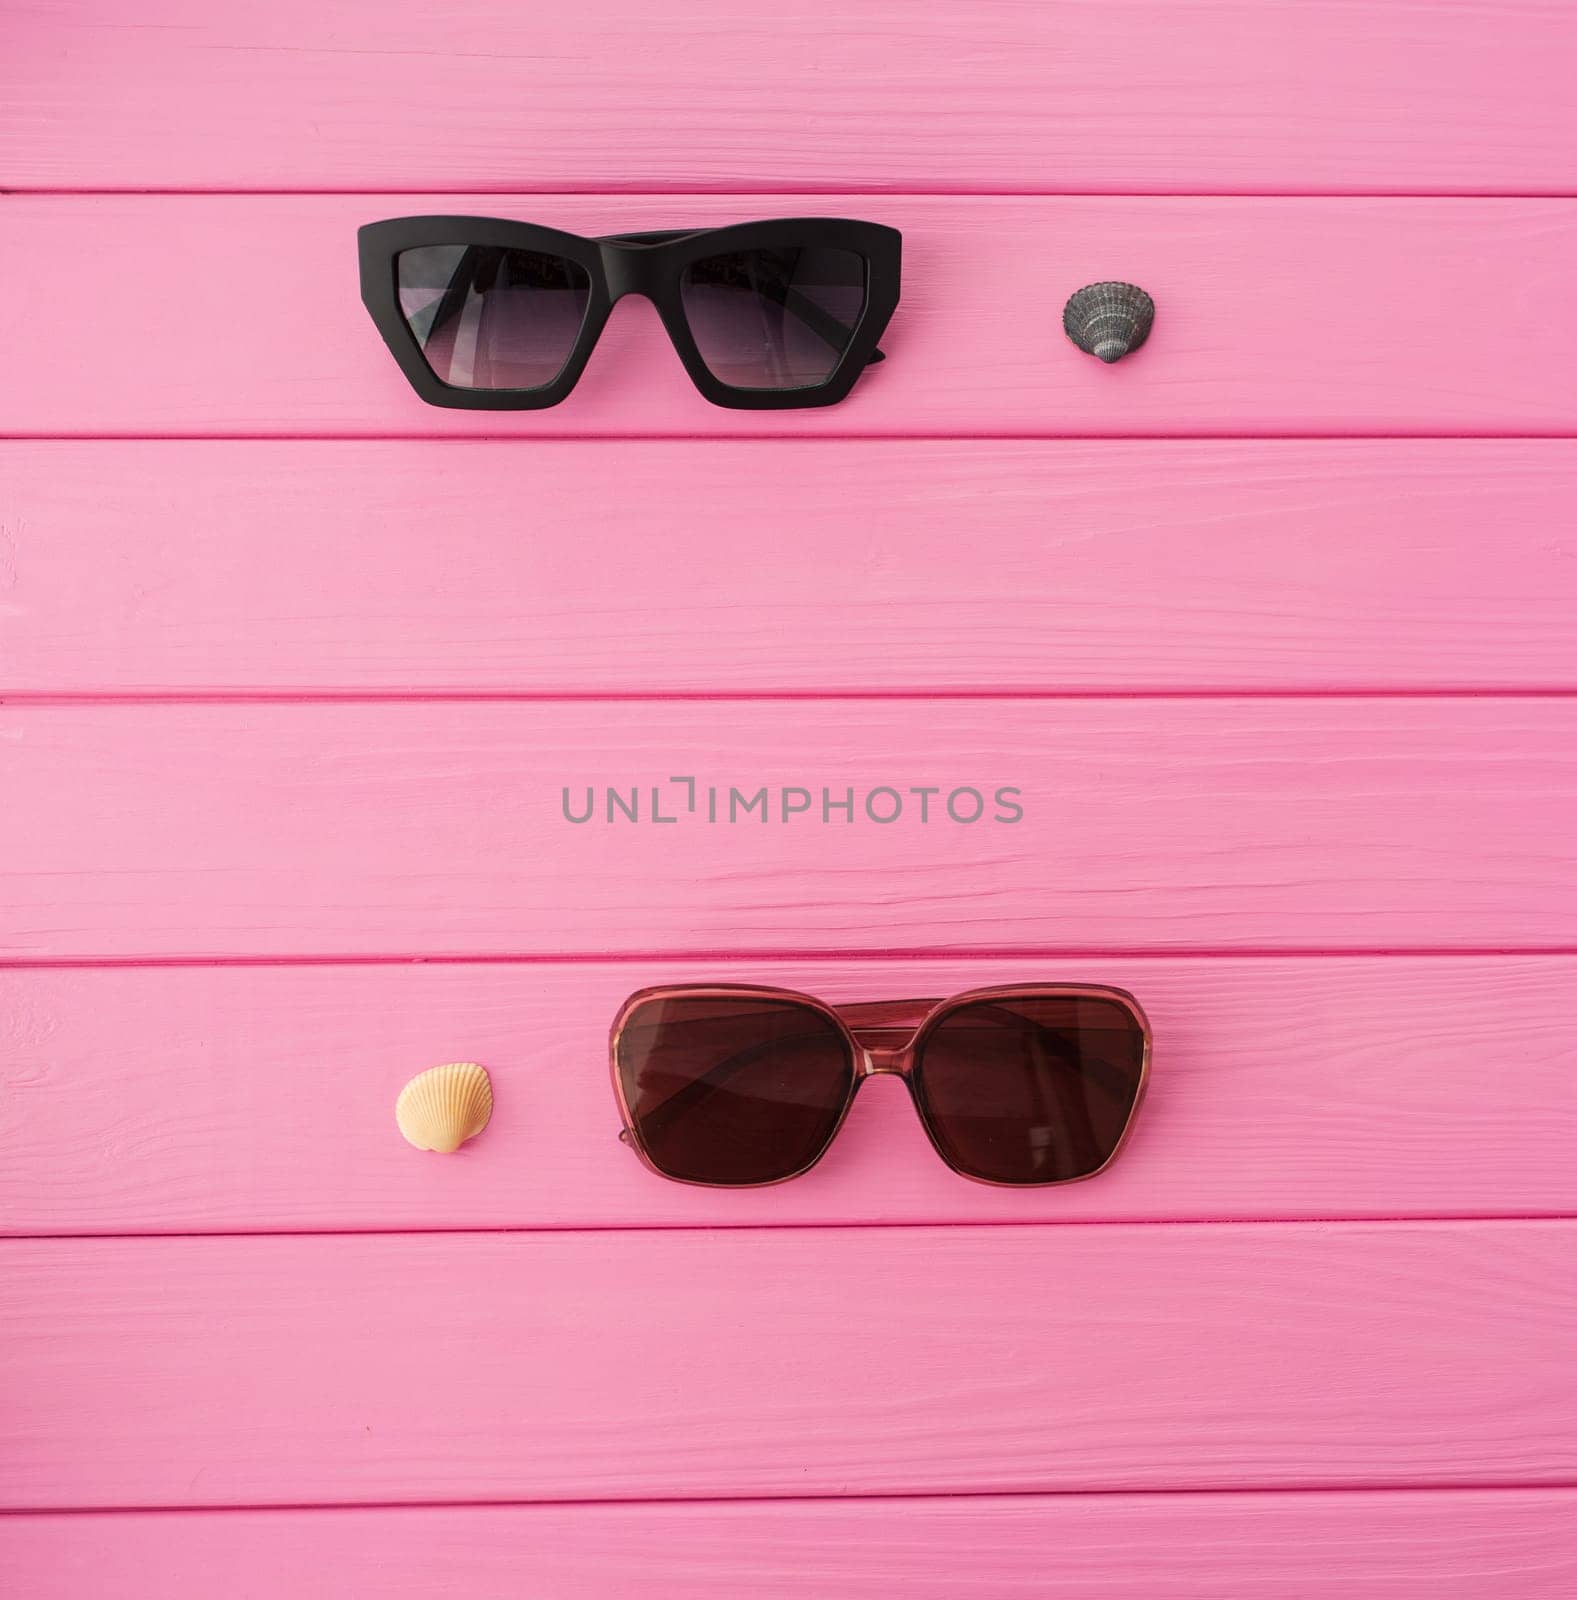 Summer abstract background mockup template free copy space for text pattern sample top view above on pink wooden board. blank empty area for inscription. Stylish sunglasses fashionable with seashells